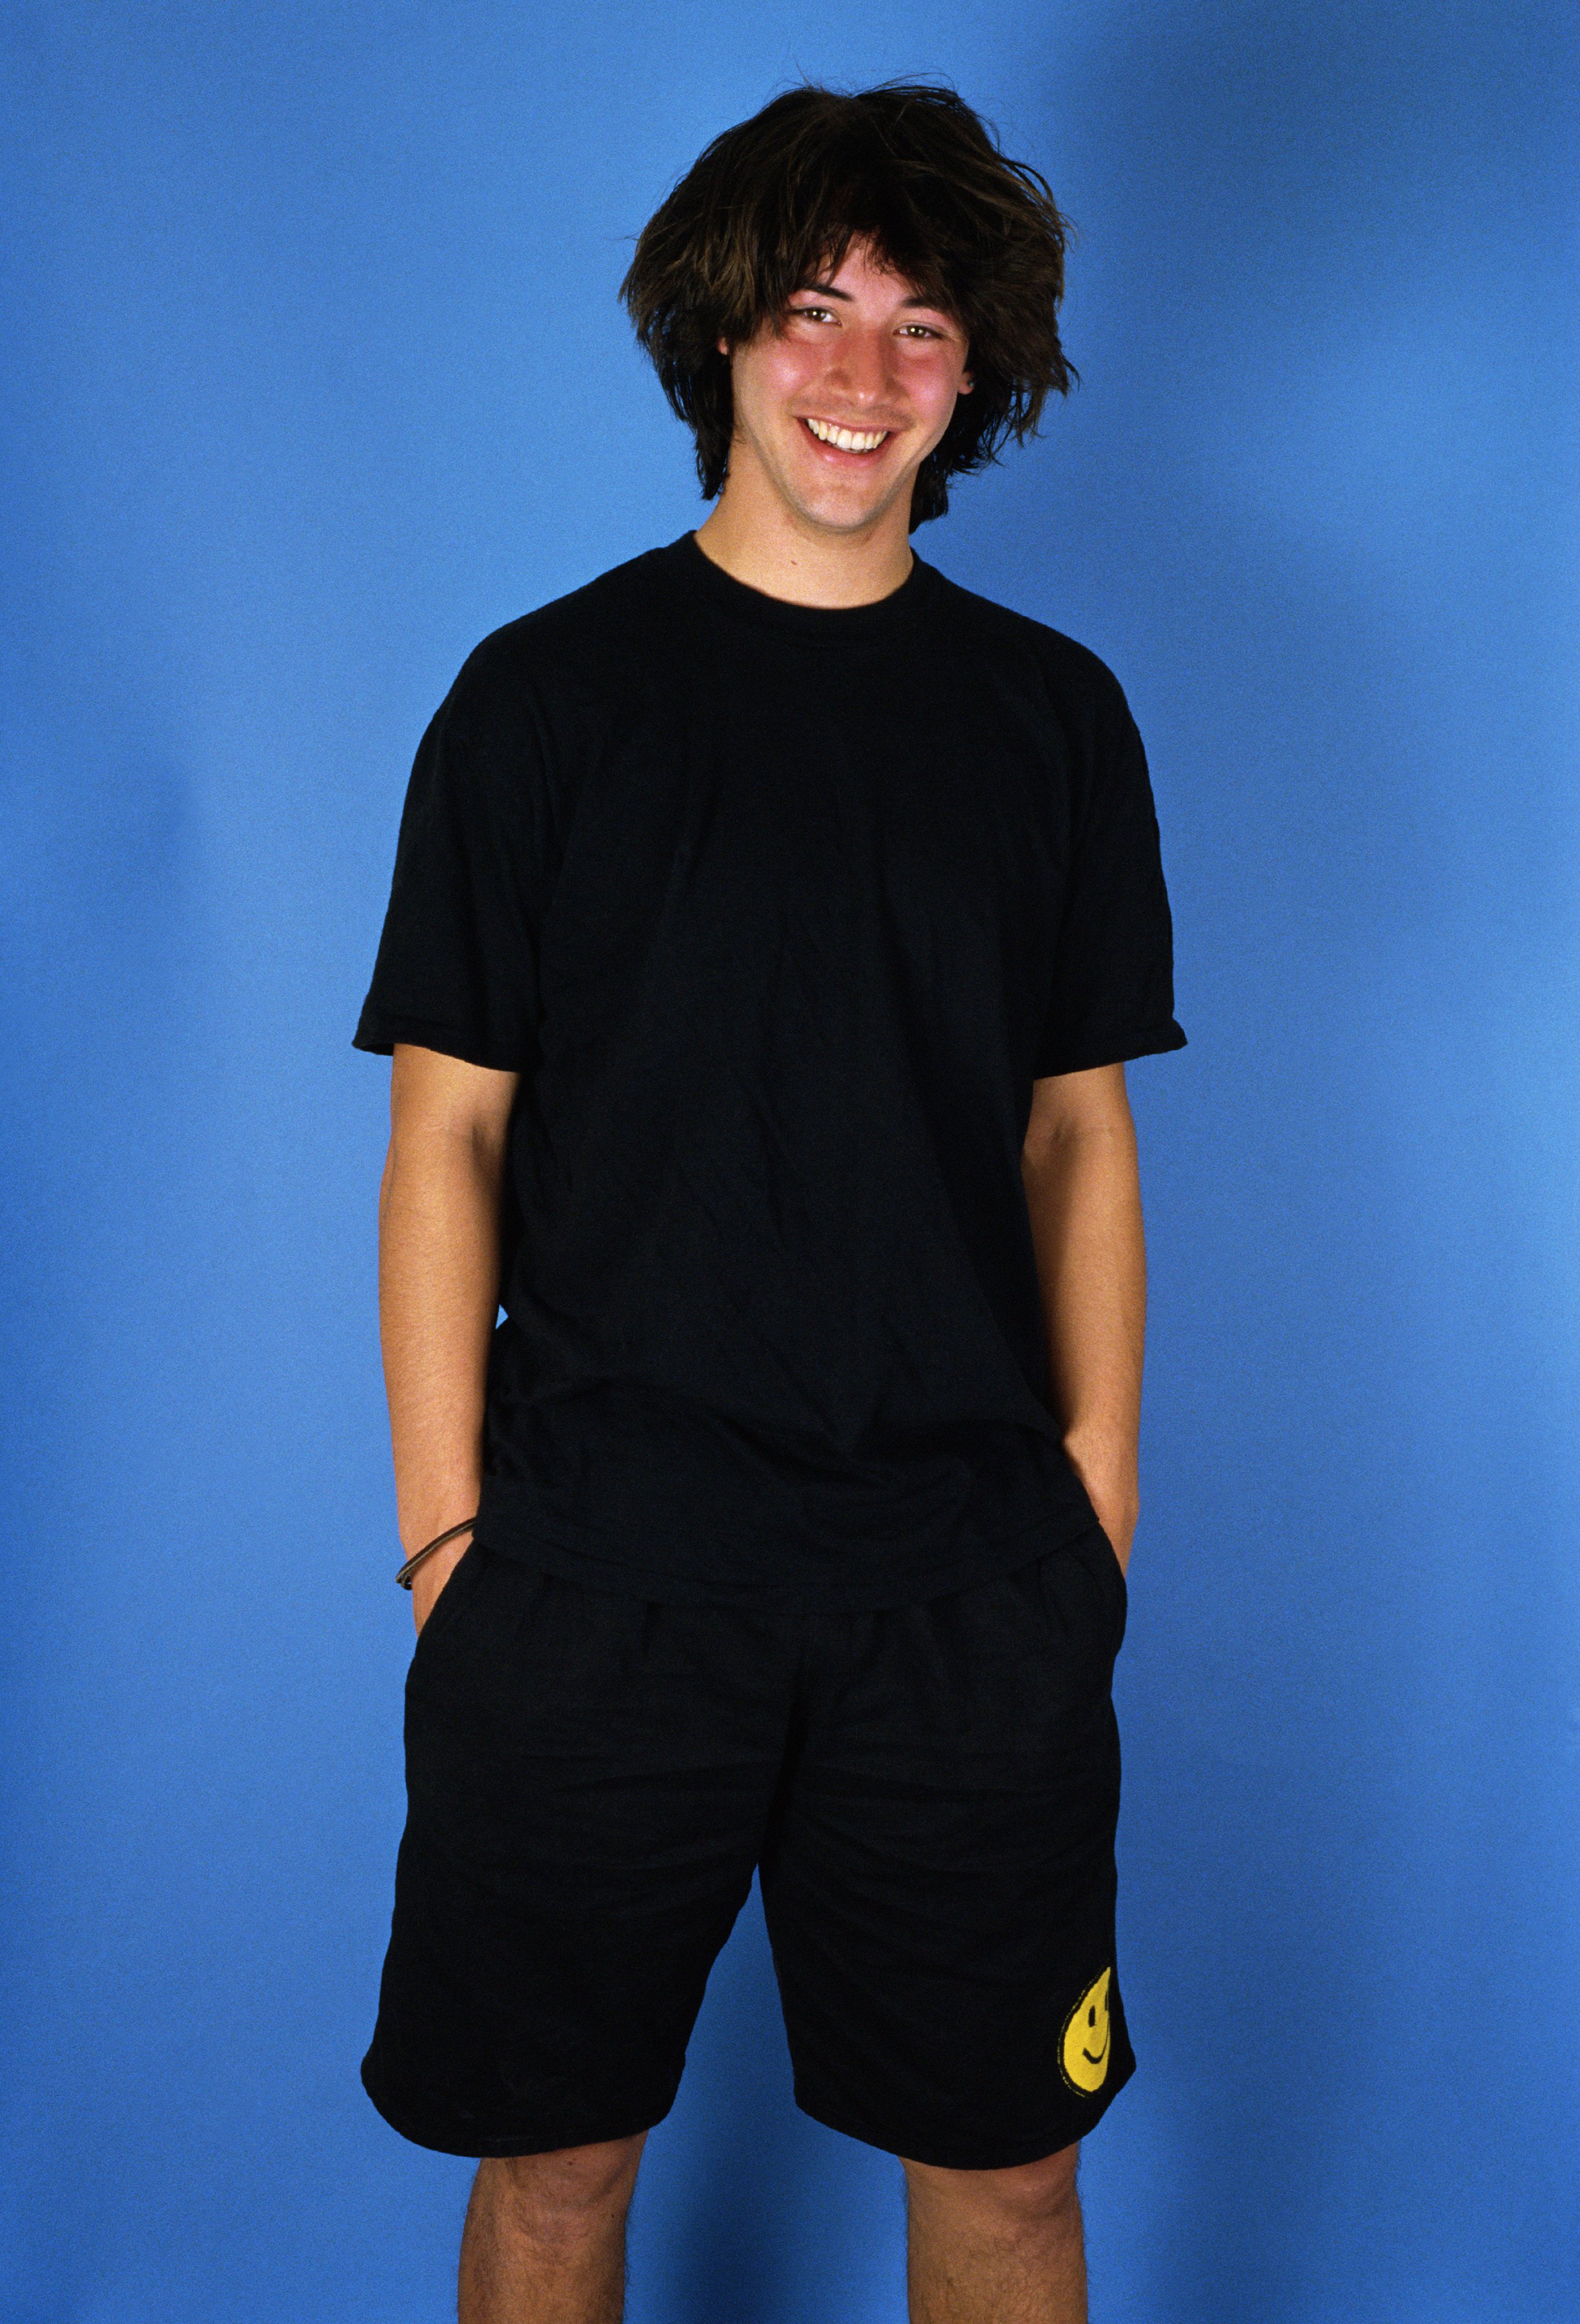 Keanu Reeves in West Hollywood, um 1987 | Quelle: Getty Images